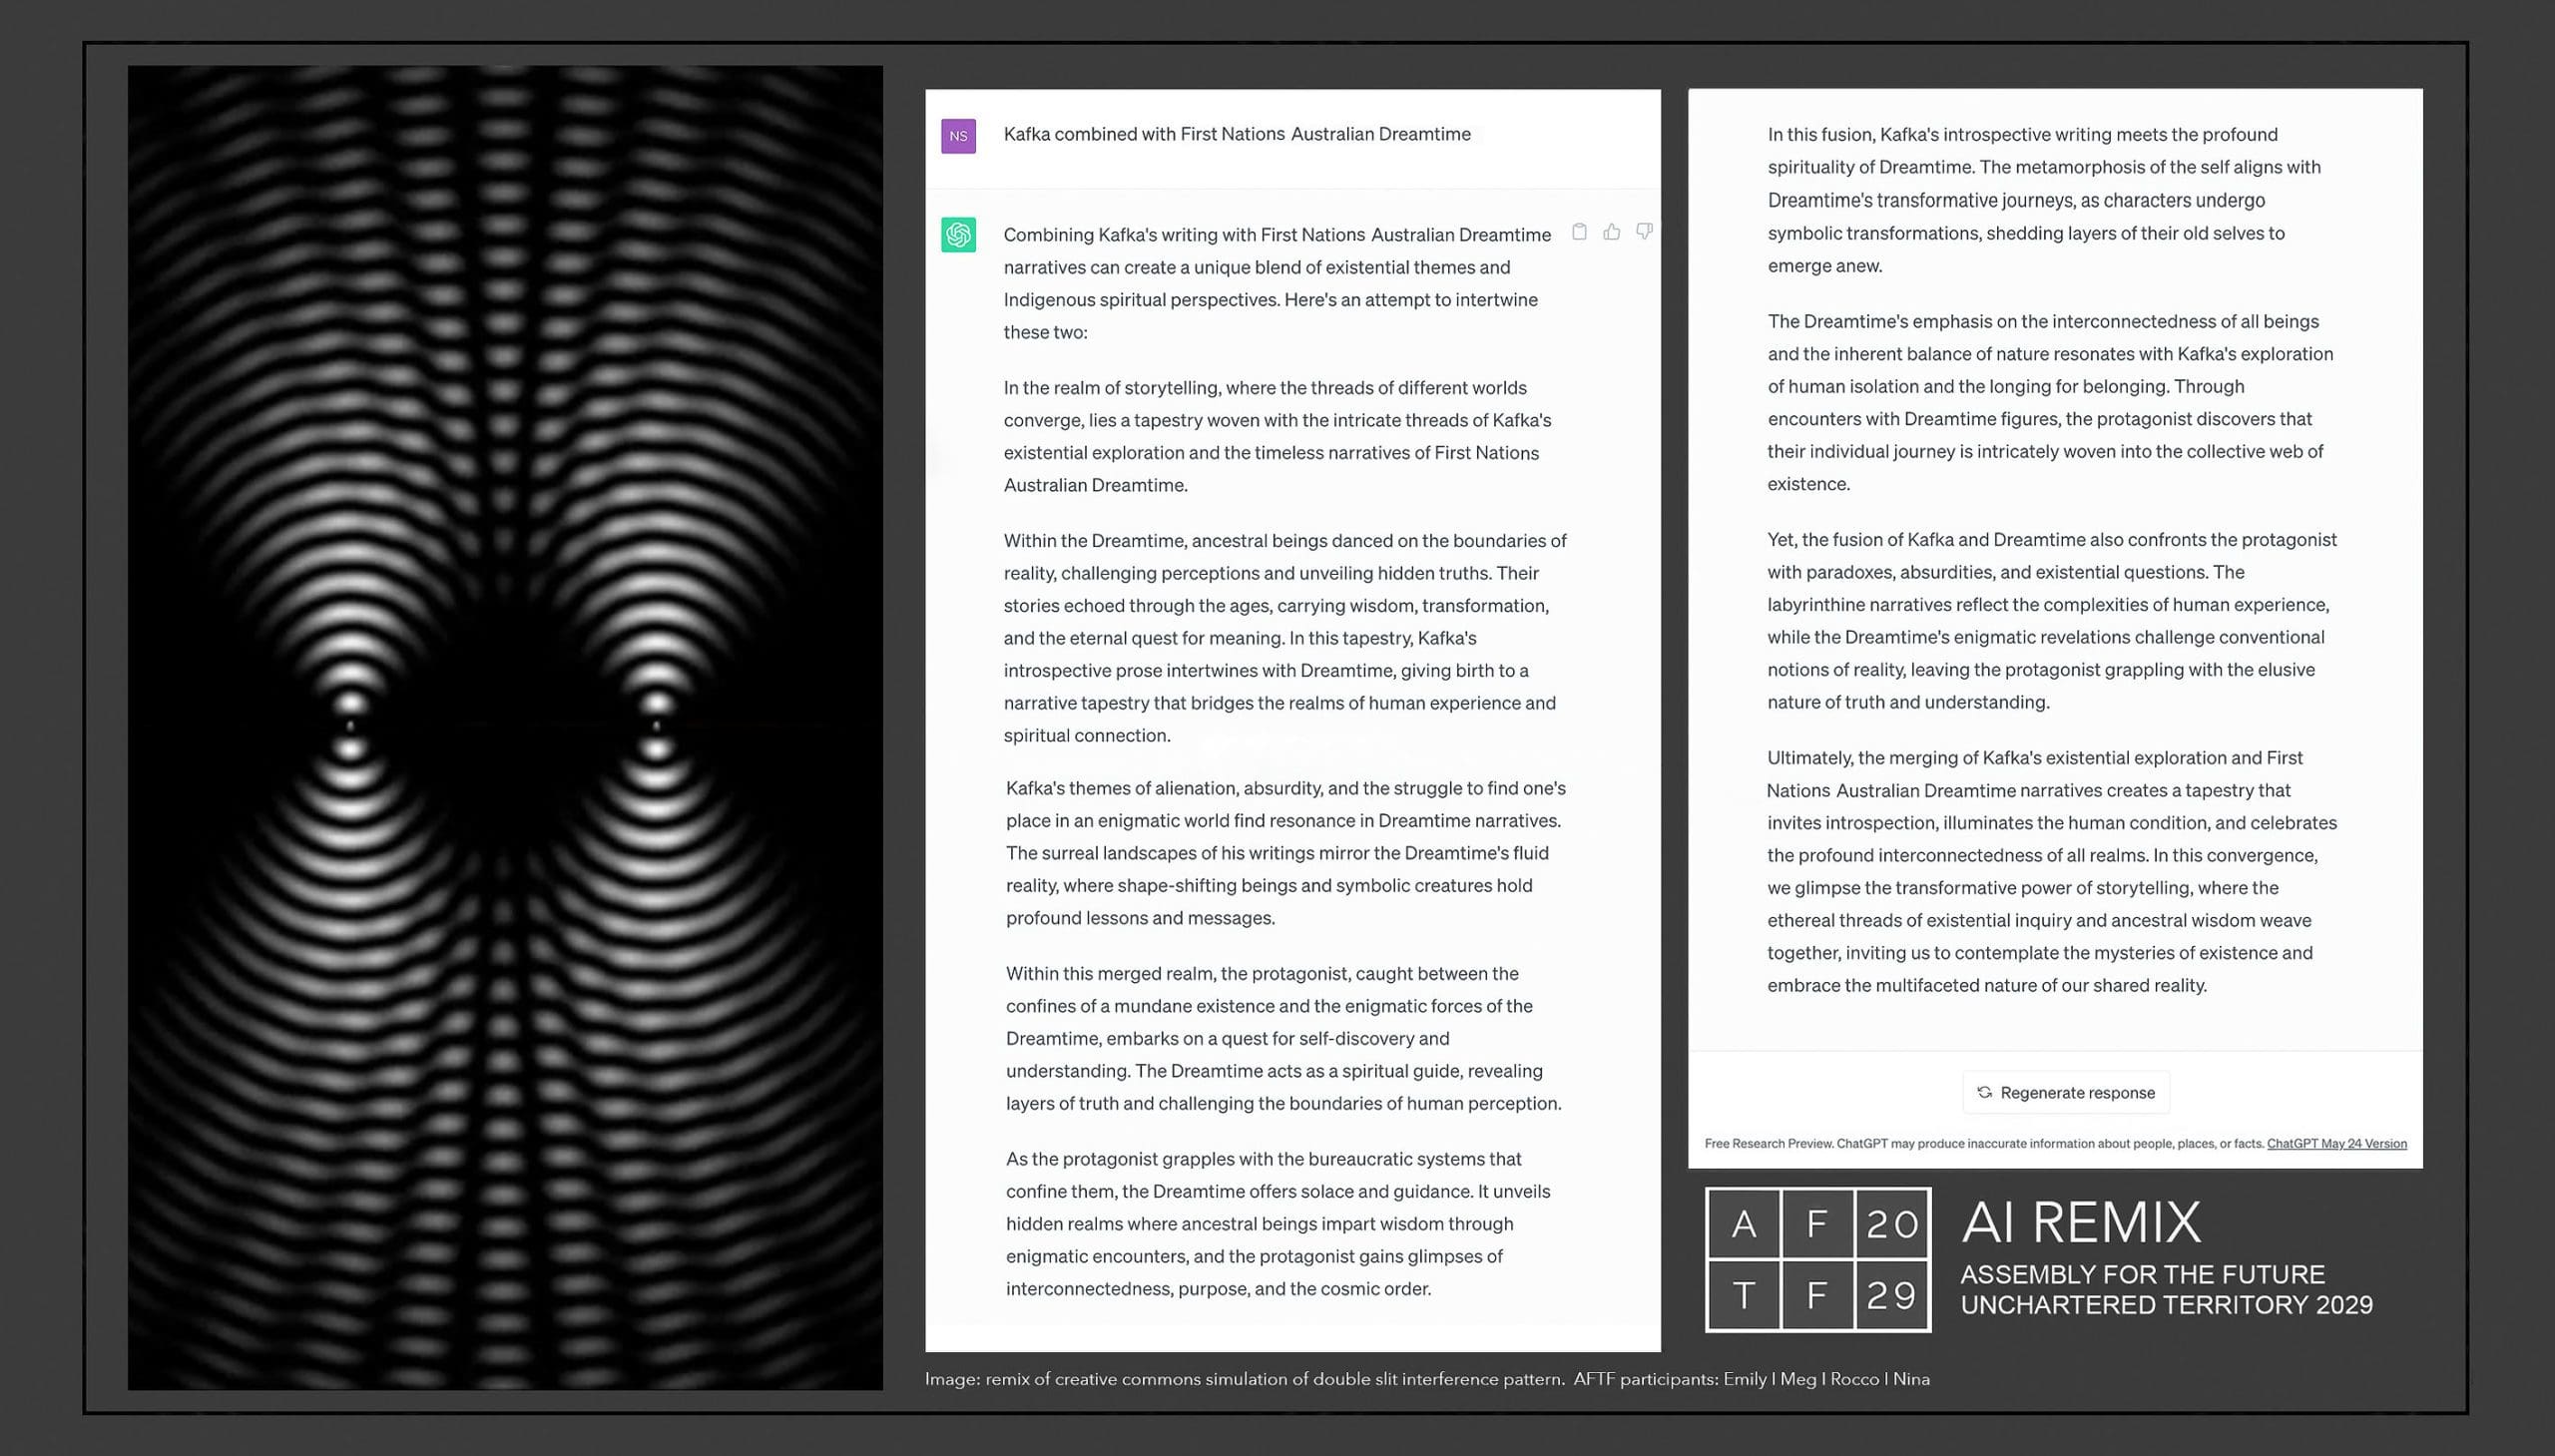 Black image with white light emanating out in bands from two central points. To the right of the image is a ChatGPT generated essay titled 'Kafka combined with First Nations Australian Dreamtime narratives'. Plain text of essay provided below the image. 